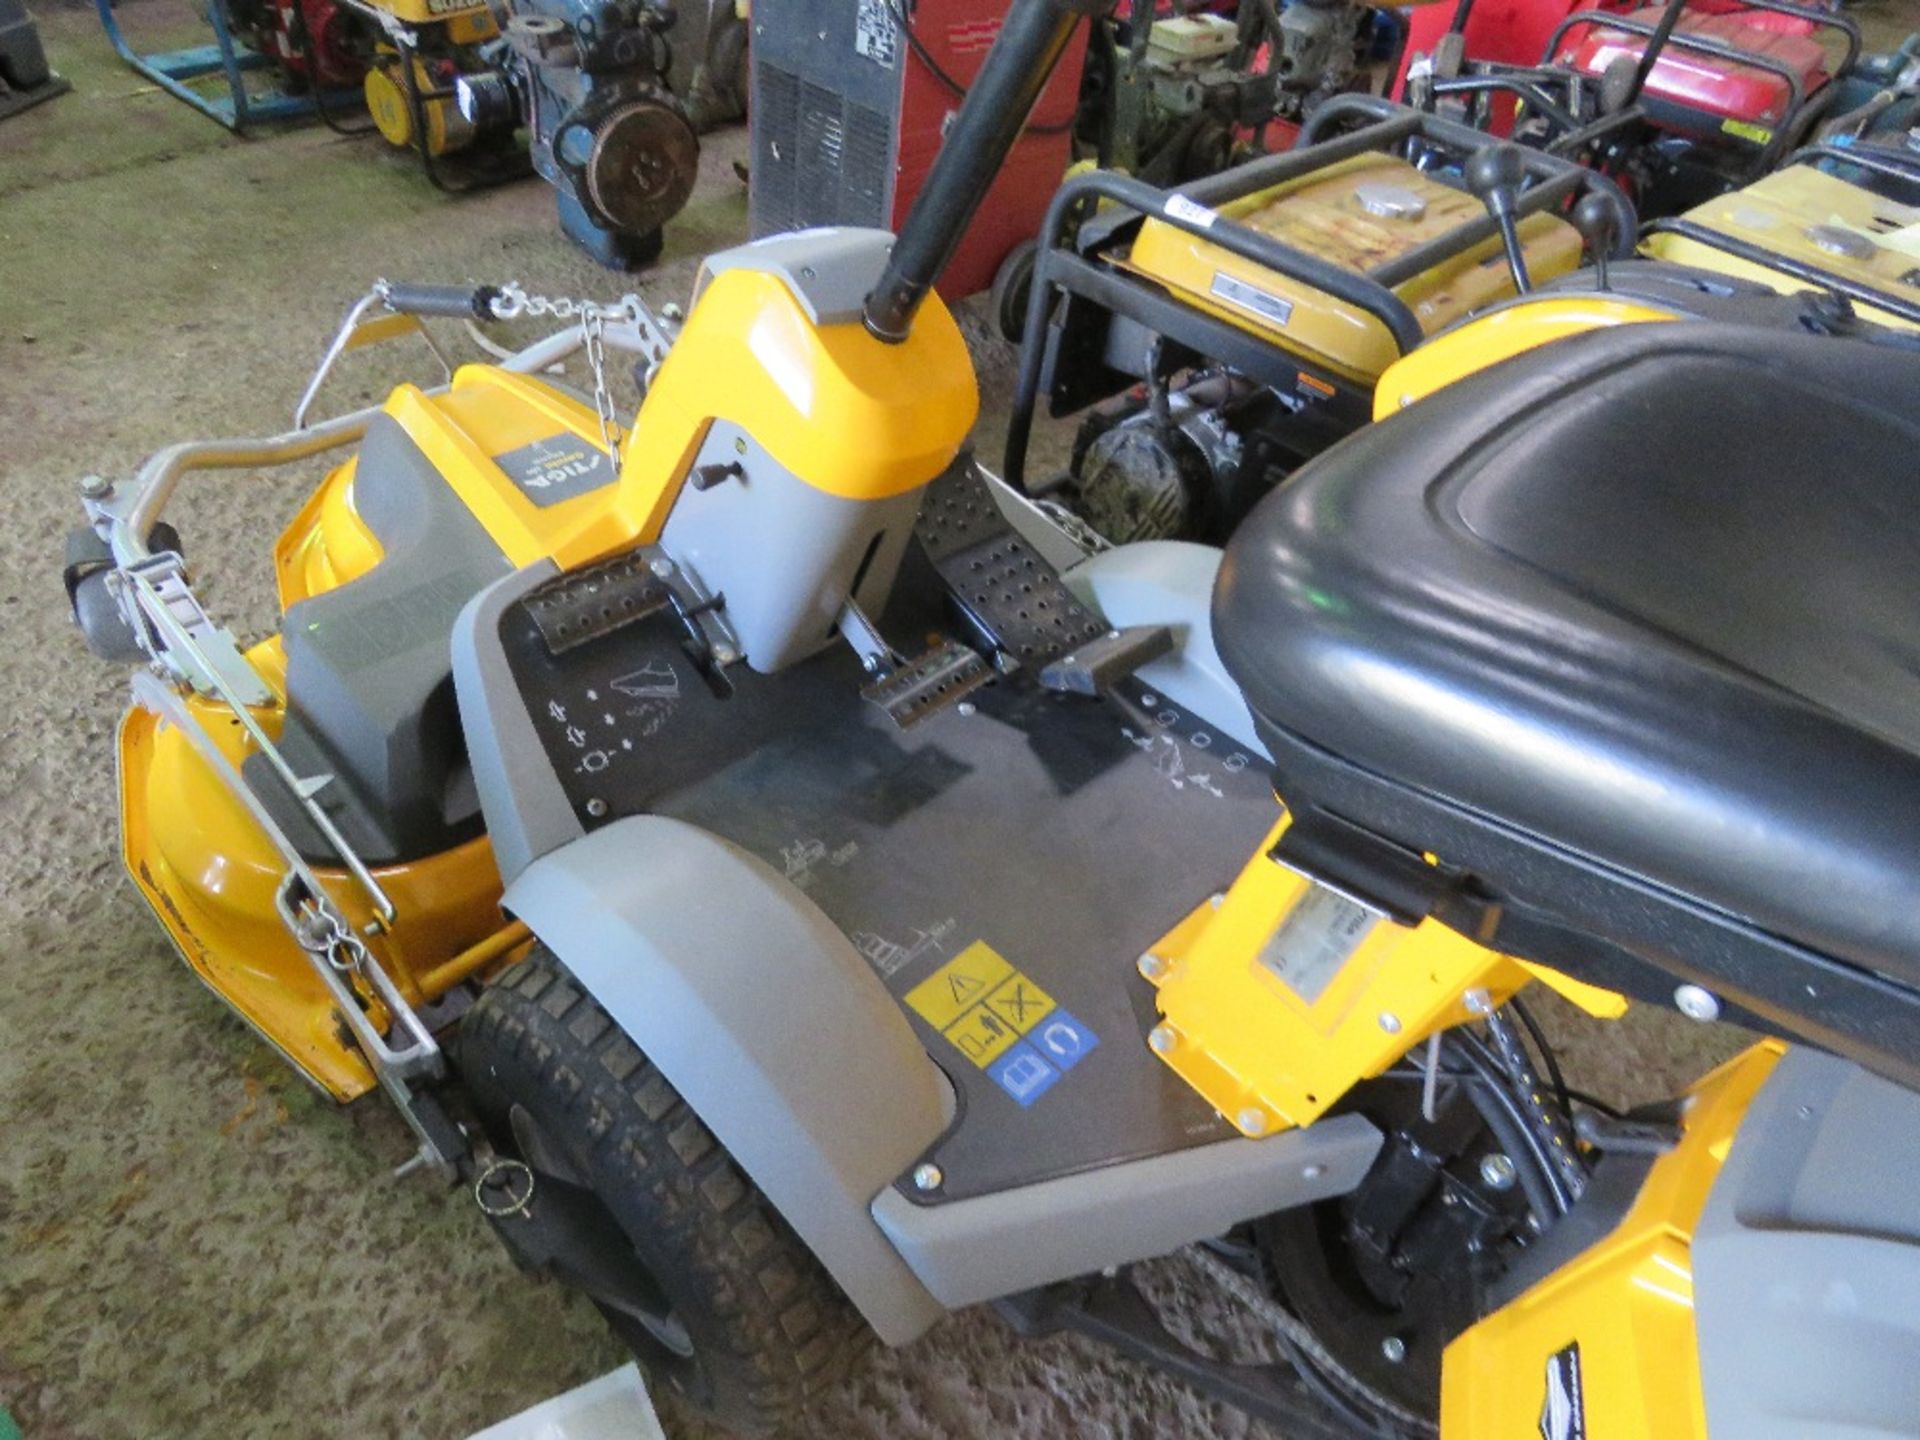 STIGA PARK 520P RIDE ON MOWER WITH COMBI 100 DECK. 273 REC HRS, YEAR 2015. WHEN TESTED WAS SEEN TO D - Image 5 of 11